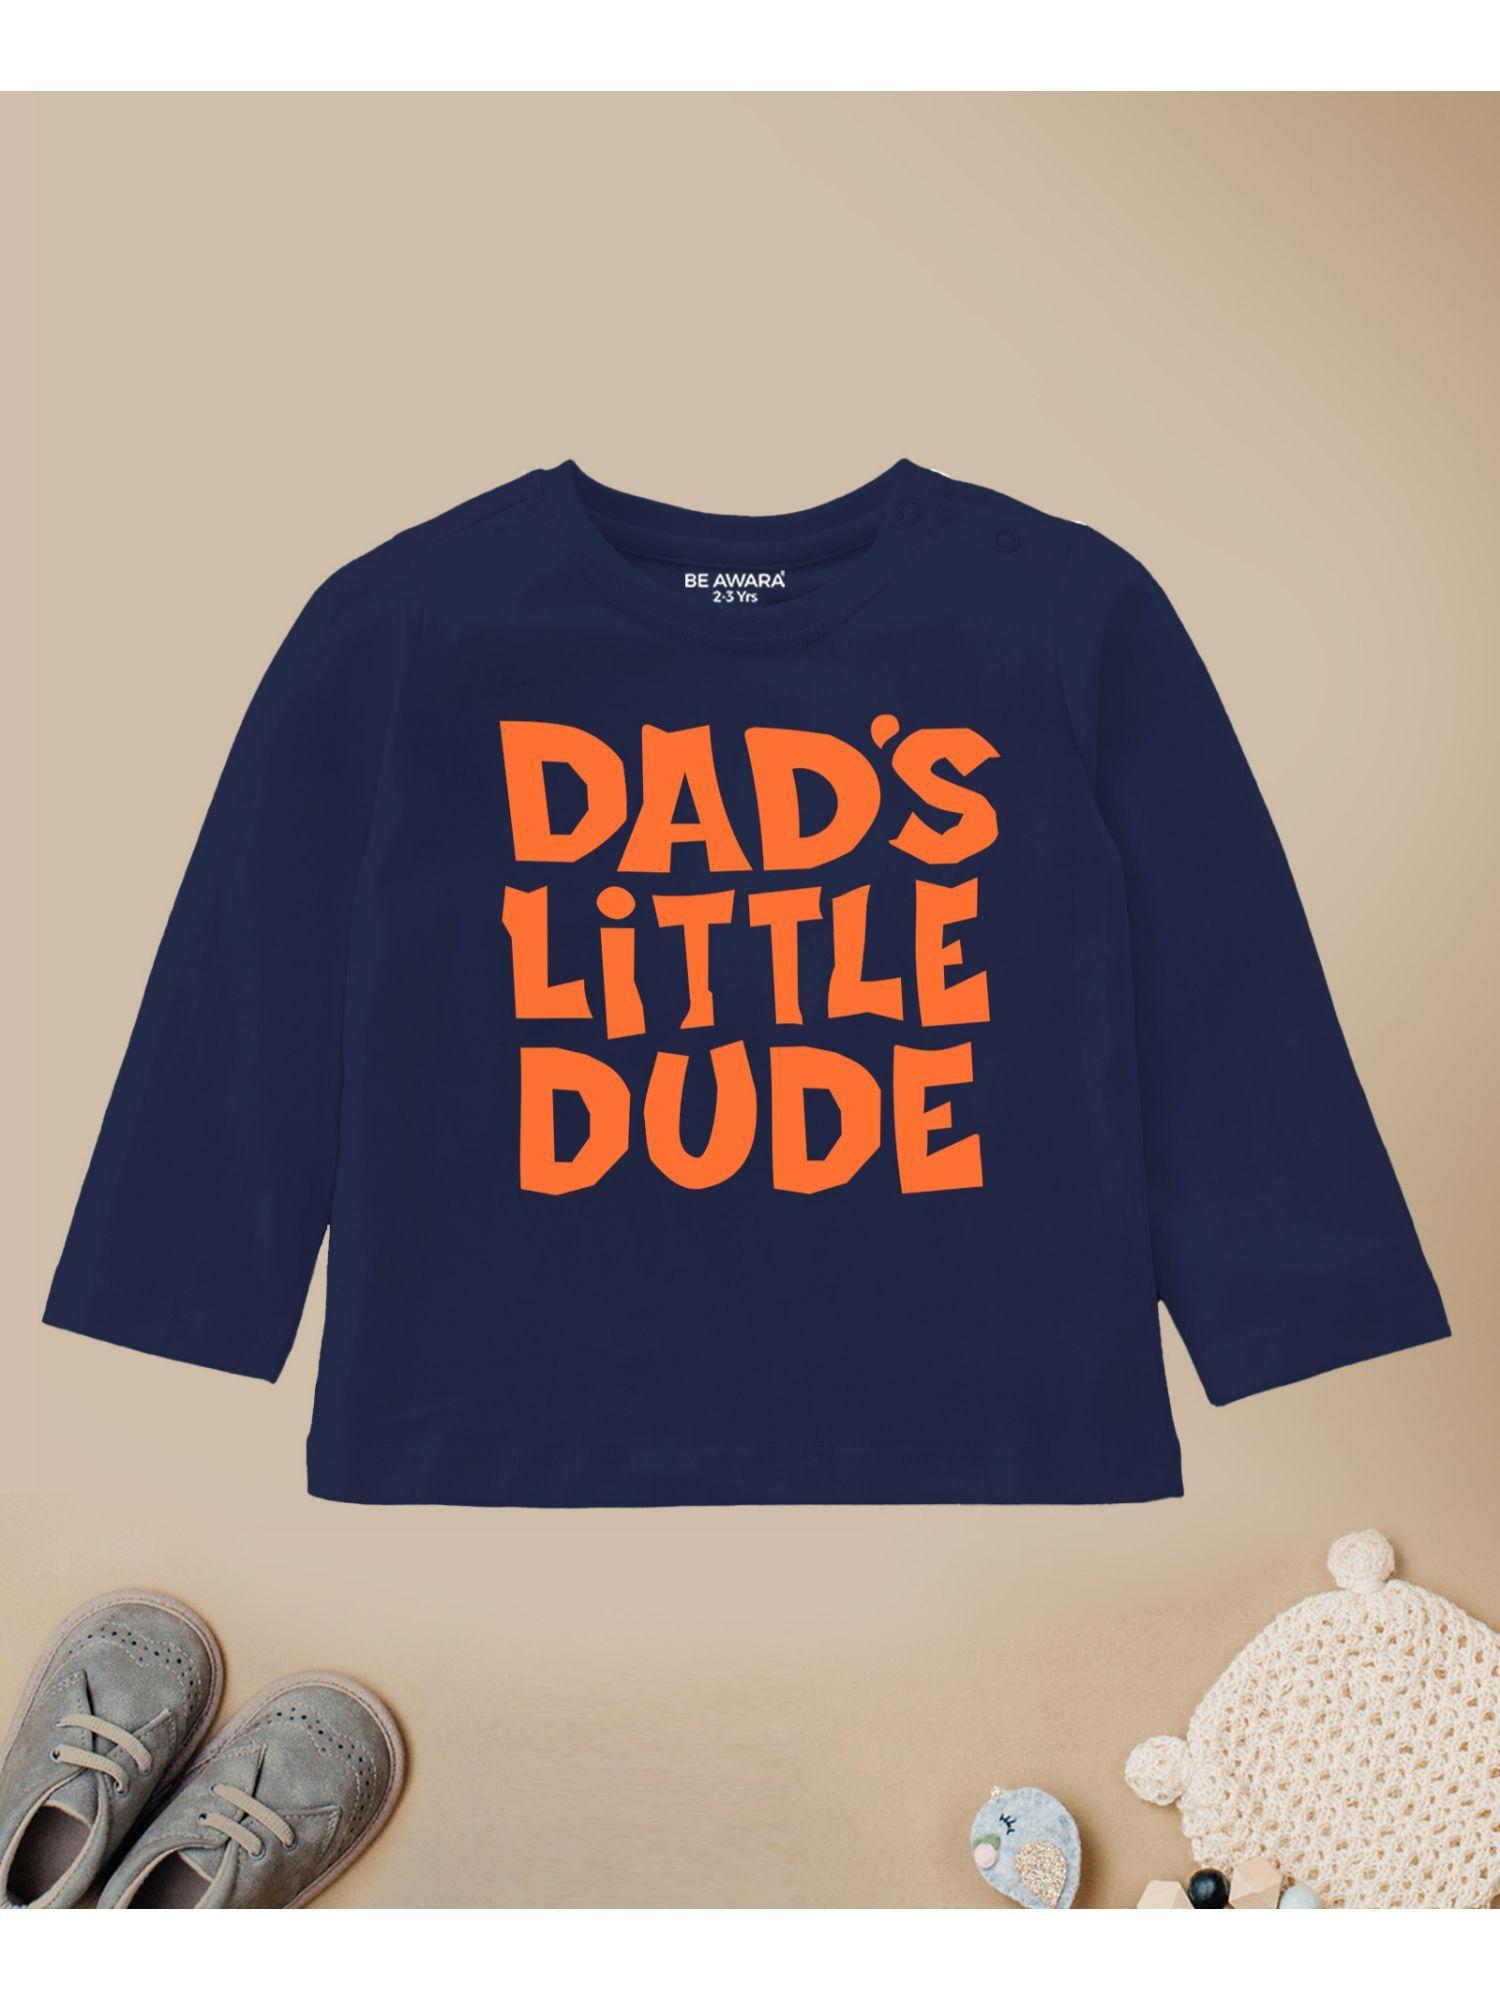 dad's little dude full sleeves printed t-shirt navy blue